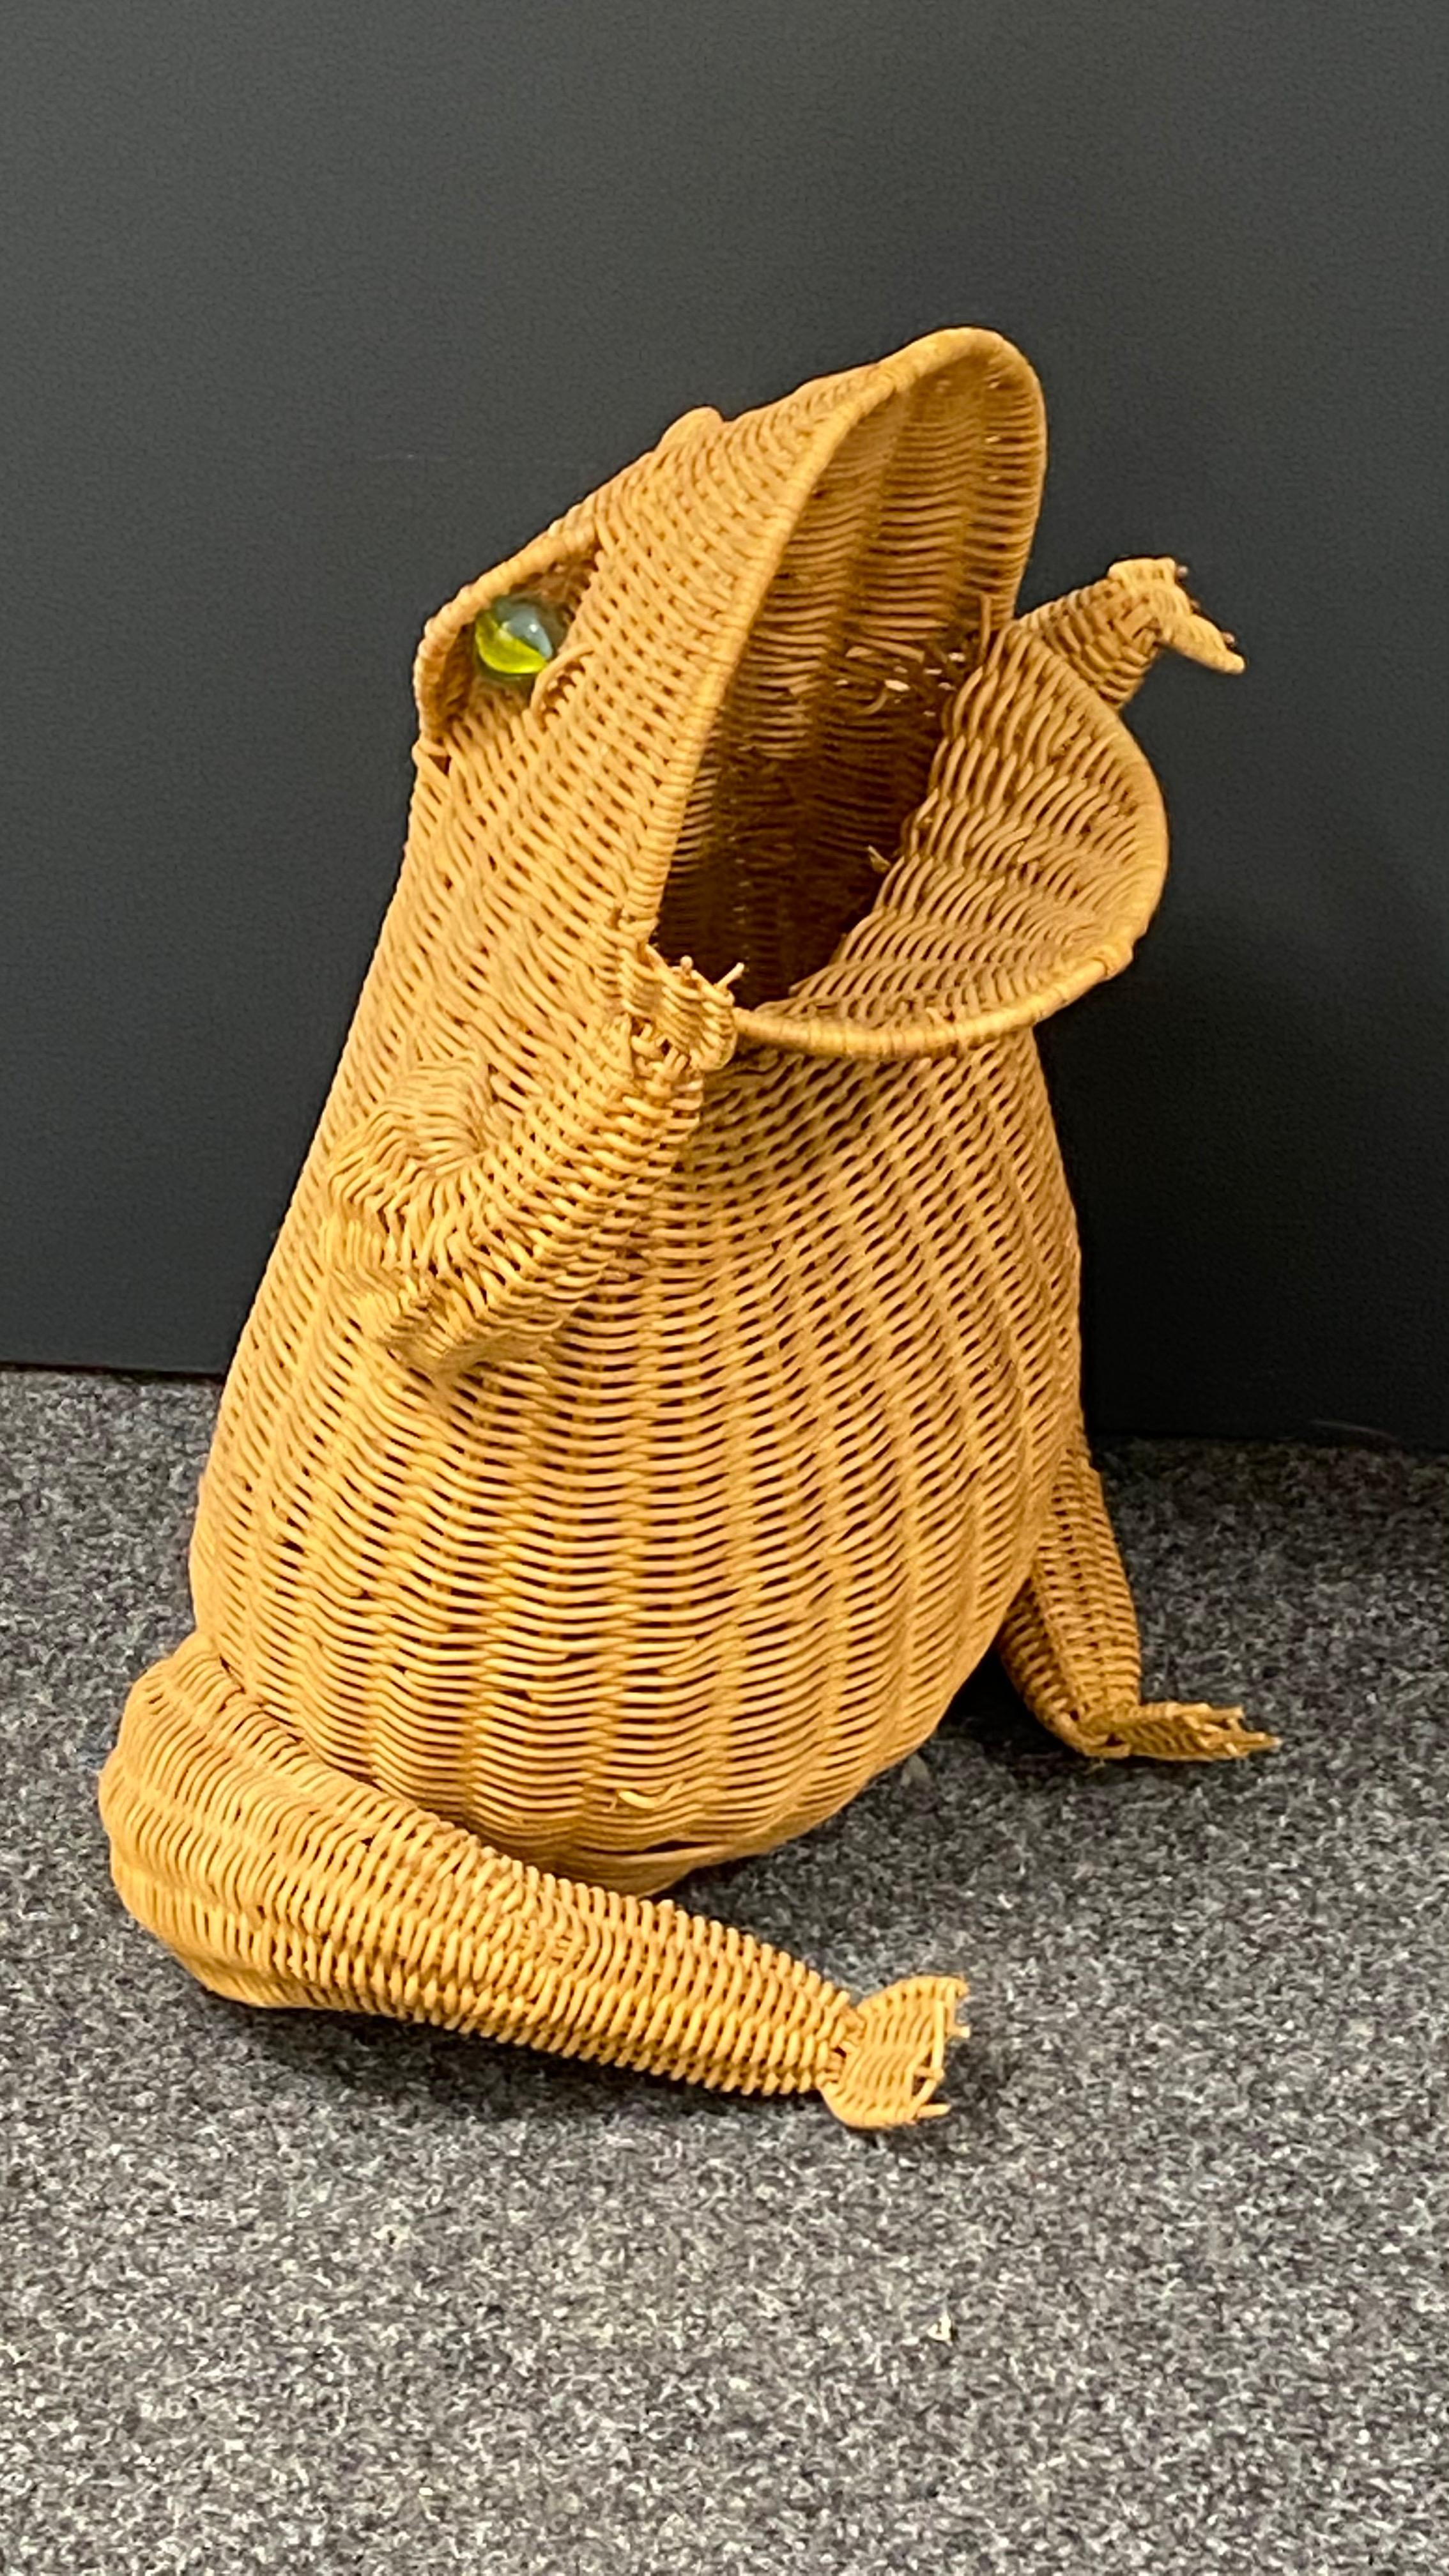 Hand-Crafted Mid-Century Modern Frog Wicker Magazine Rack Stand, 1970s, German For Sale